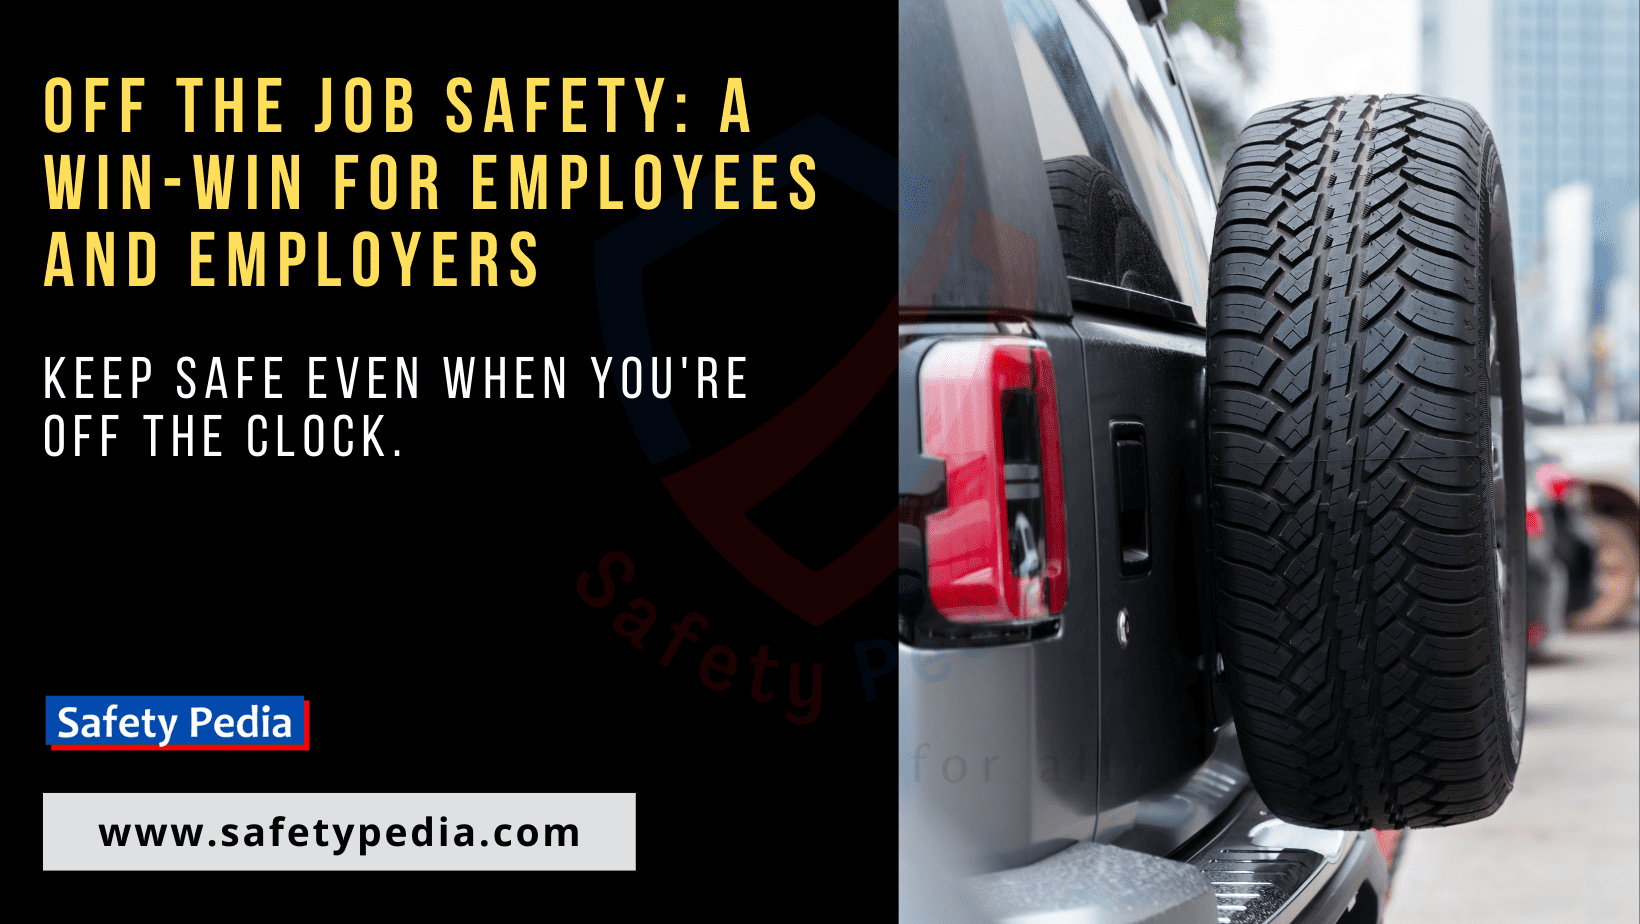 Off the Job Safety: A Win-Win for Employees and Employers, a grey SUV on thr road emphasizing safe start of journey. Keep Safe Even When You're Off the Clock.